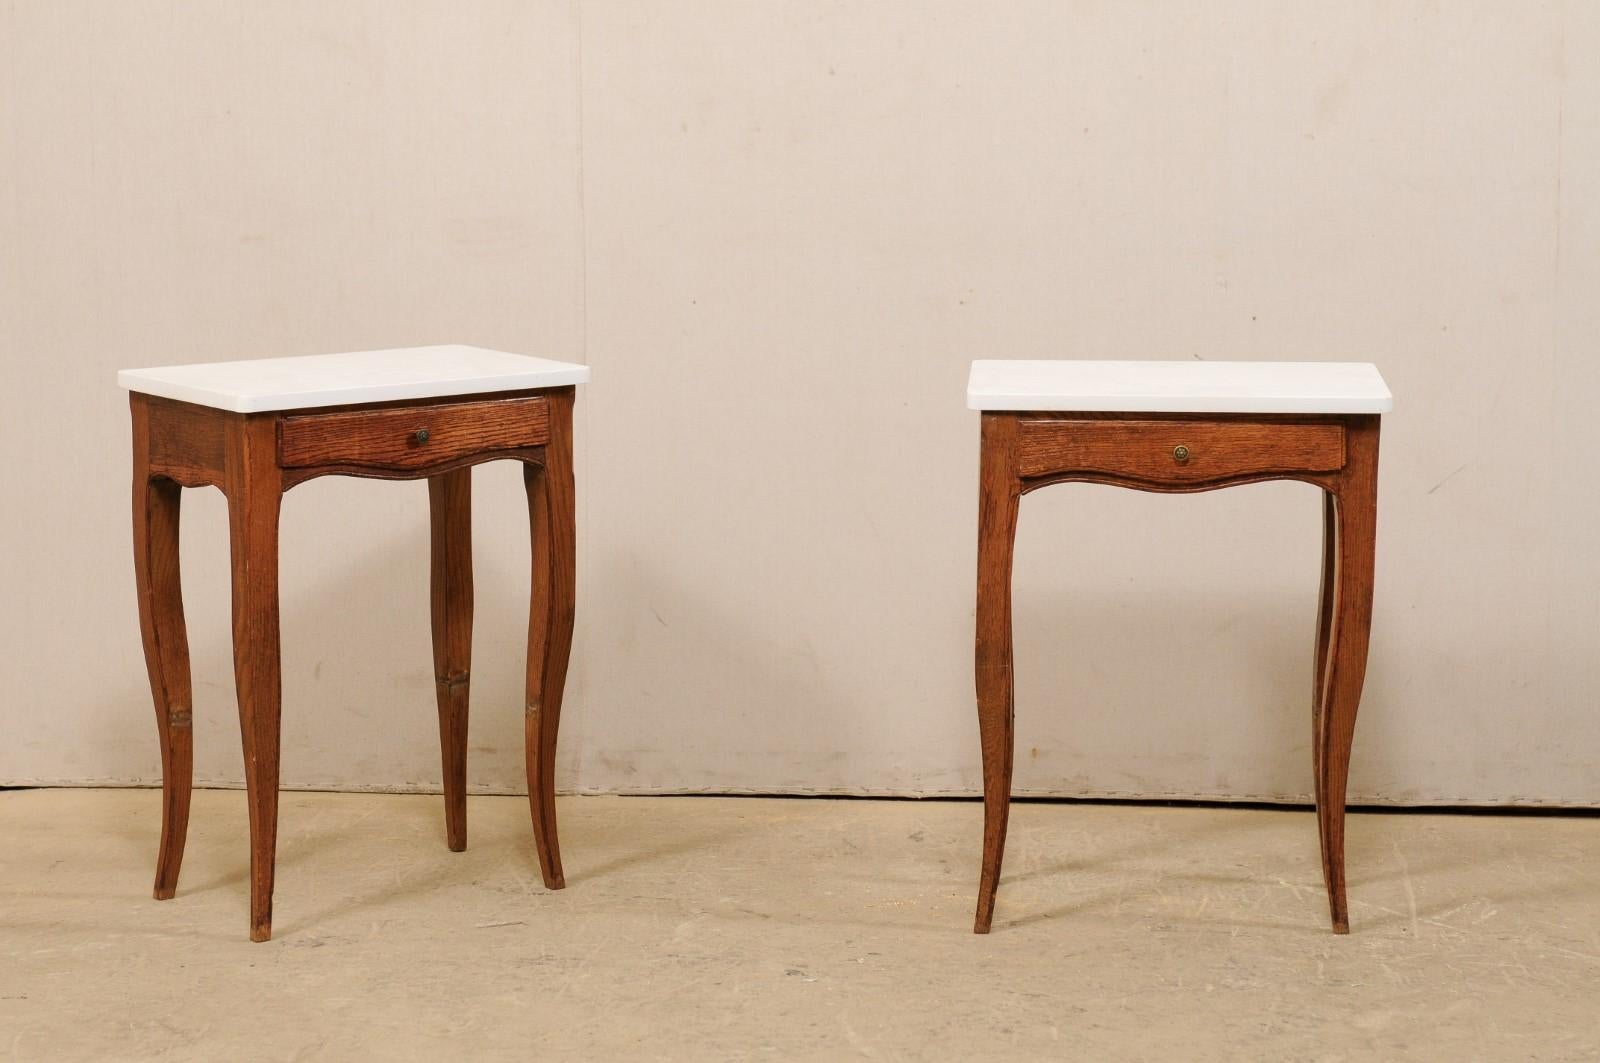 Pair of 1920s French Single-Drawer Side Tables with New White Quartz Tops In Good Condition For Sale In Atlanta, GA